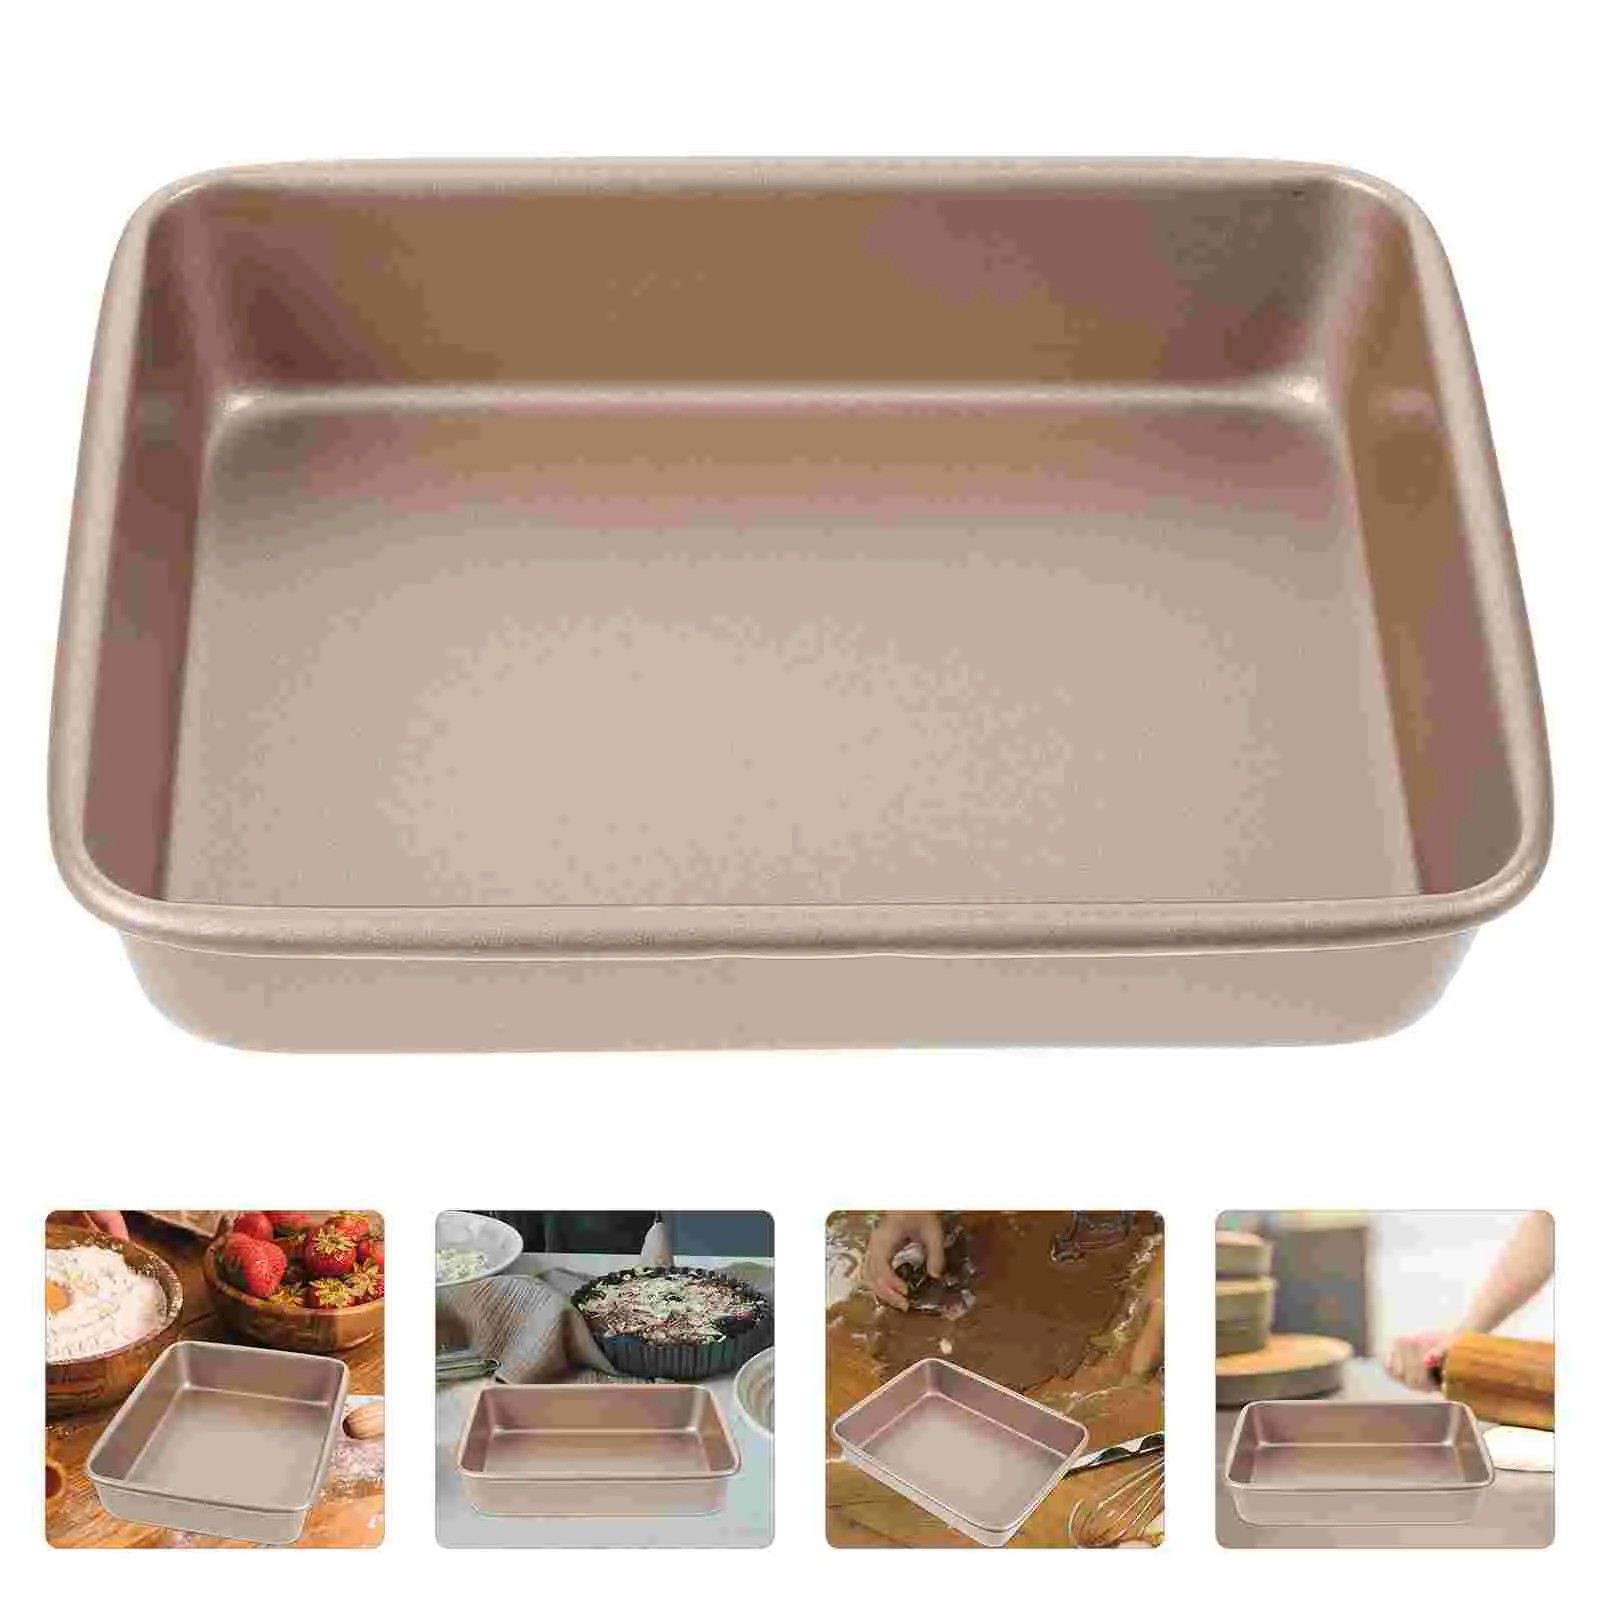 

Baking Molds Cookie Pan Rectangle Tray Trays Oven Kitchen Cake Crackers Pans Carbon Steel Bakeware